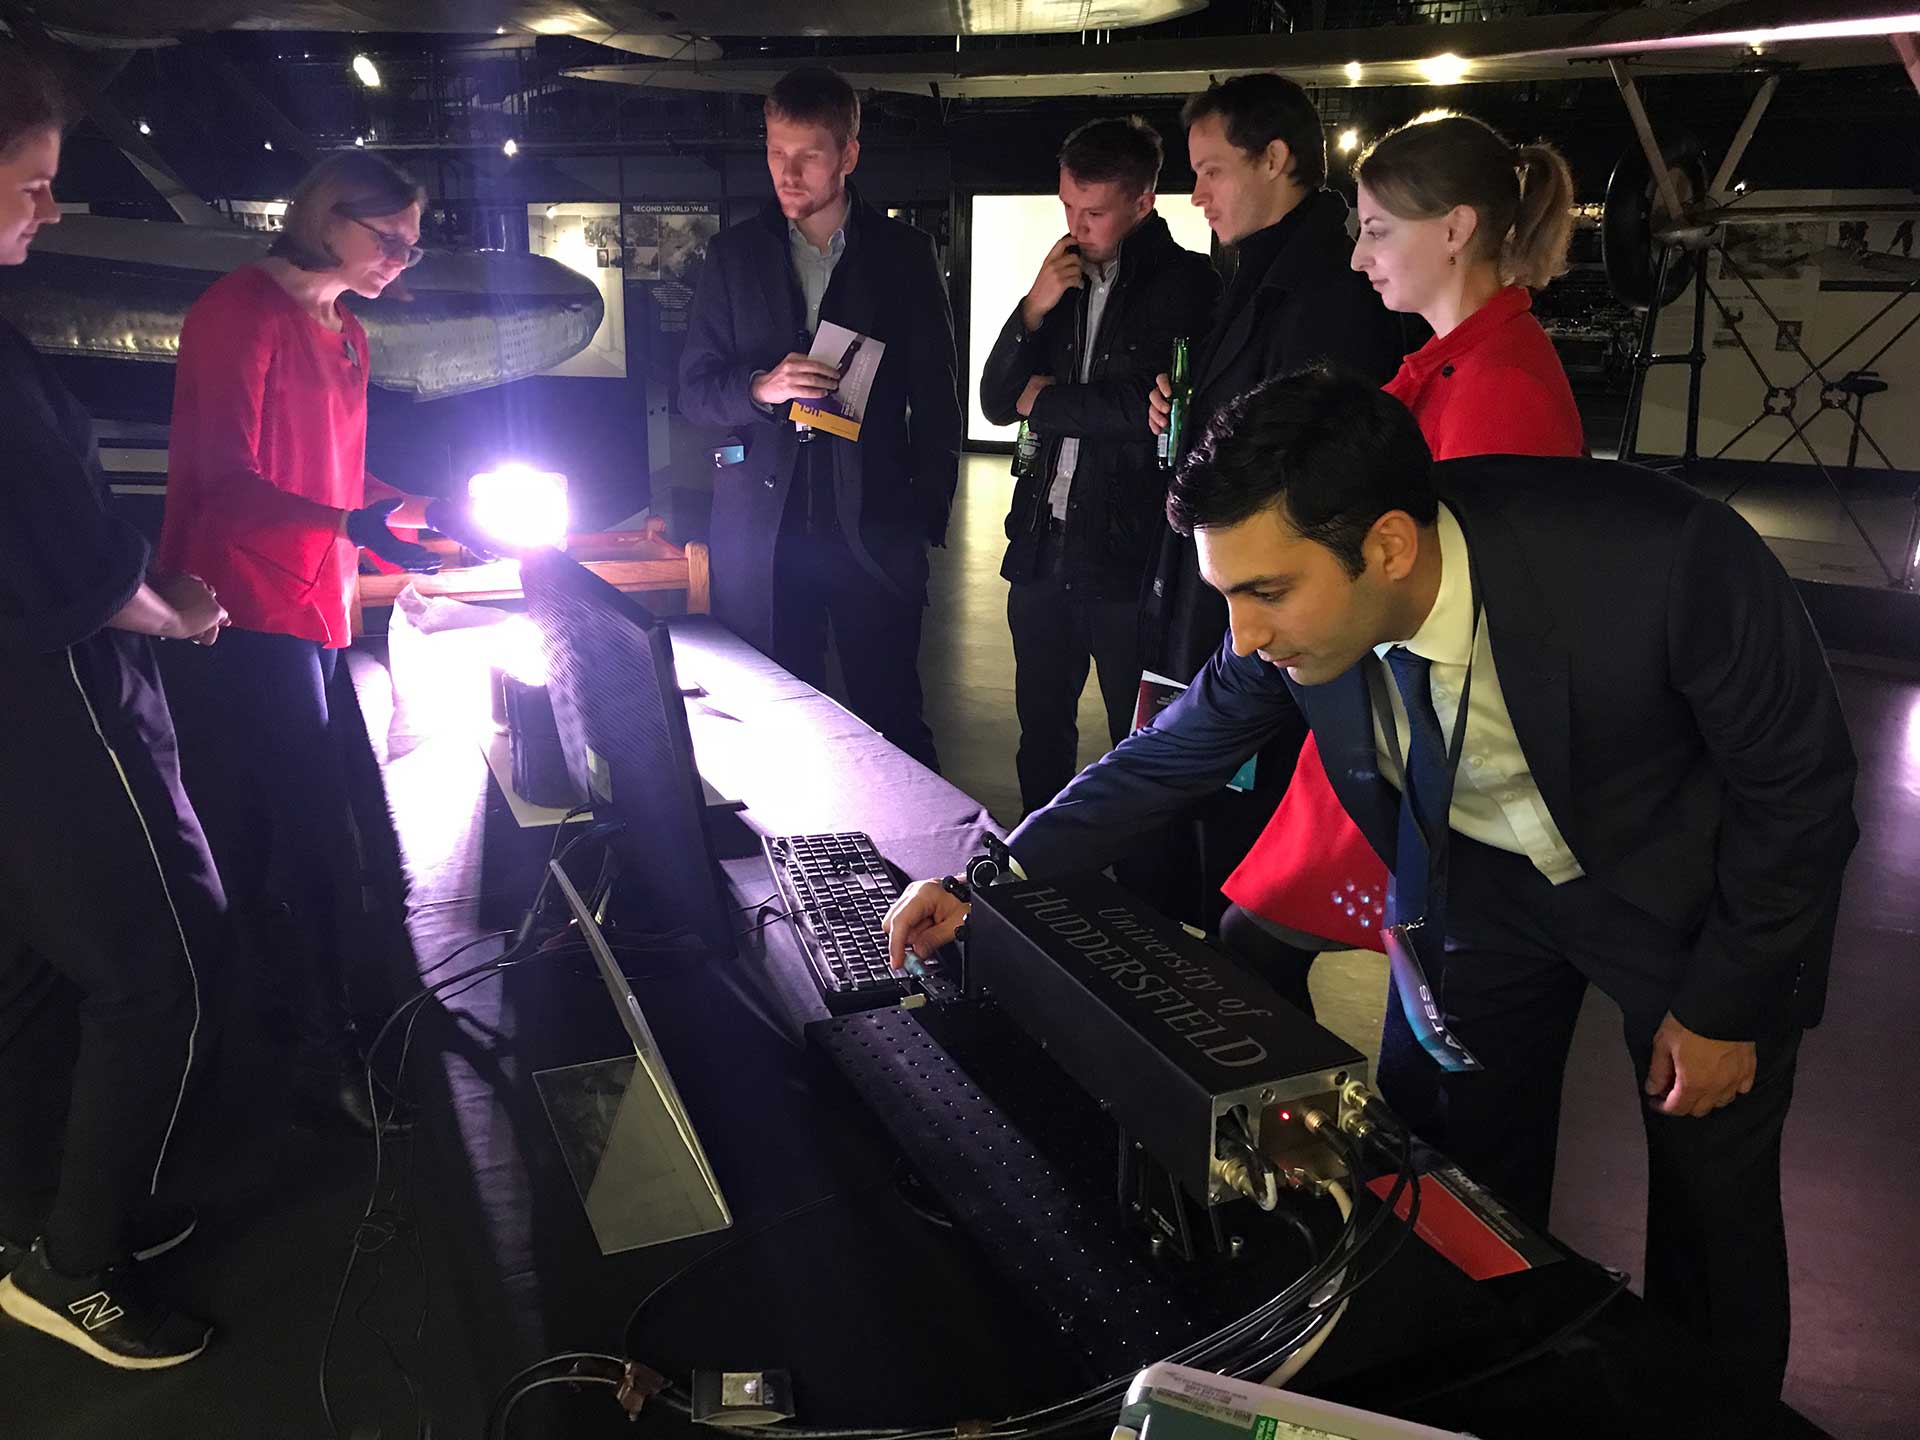 The University's Dr Muhamedsalih demonstrating the optical interferometry system to the museum's visitors